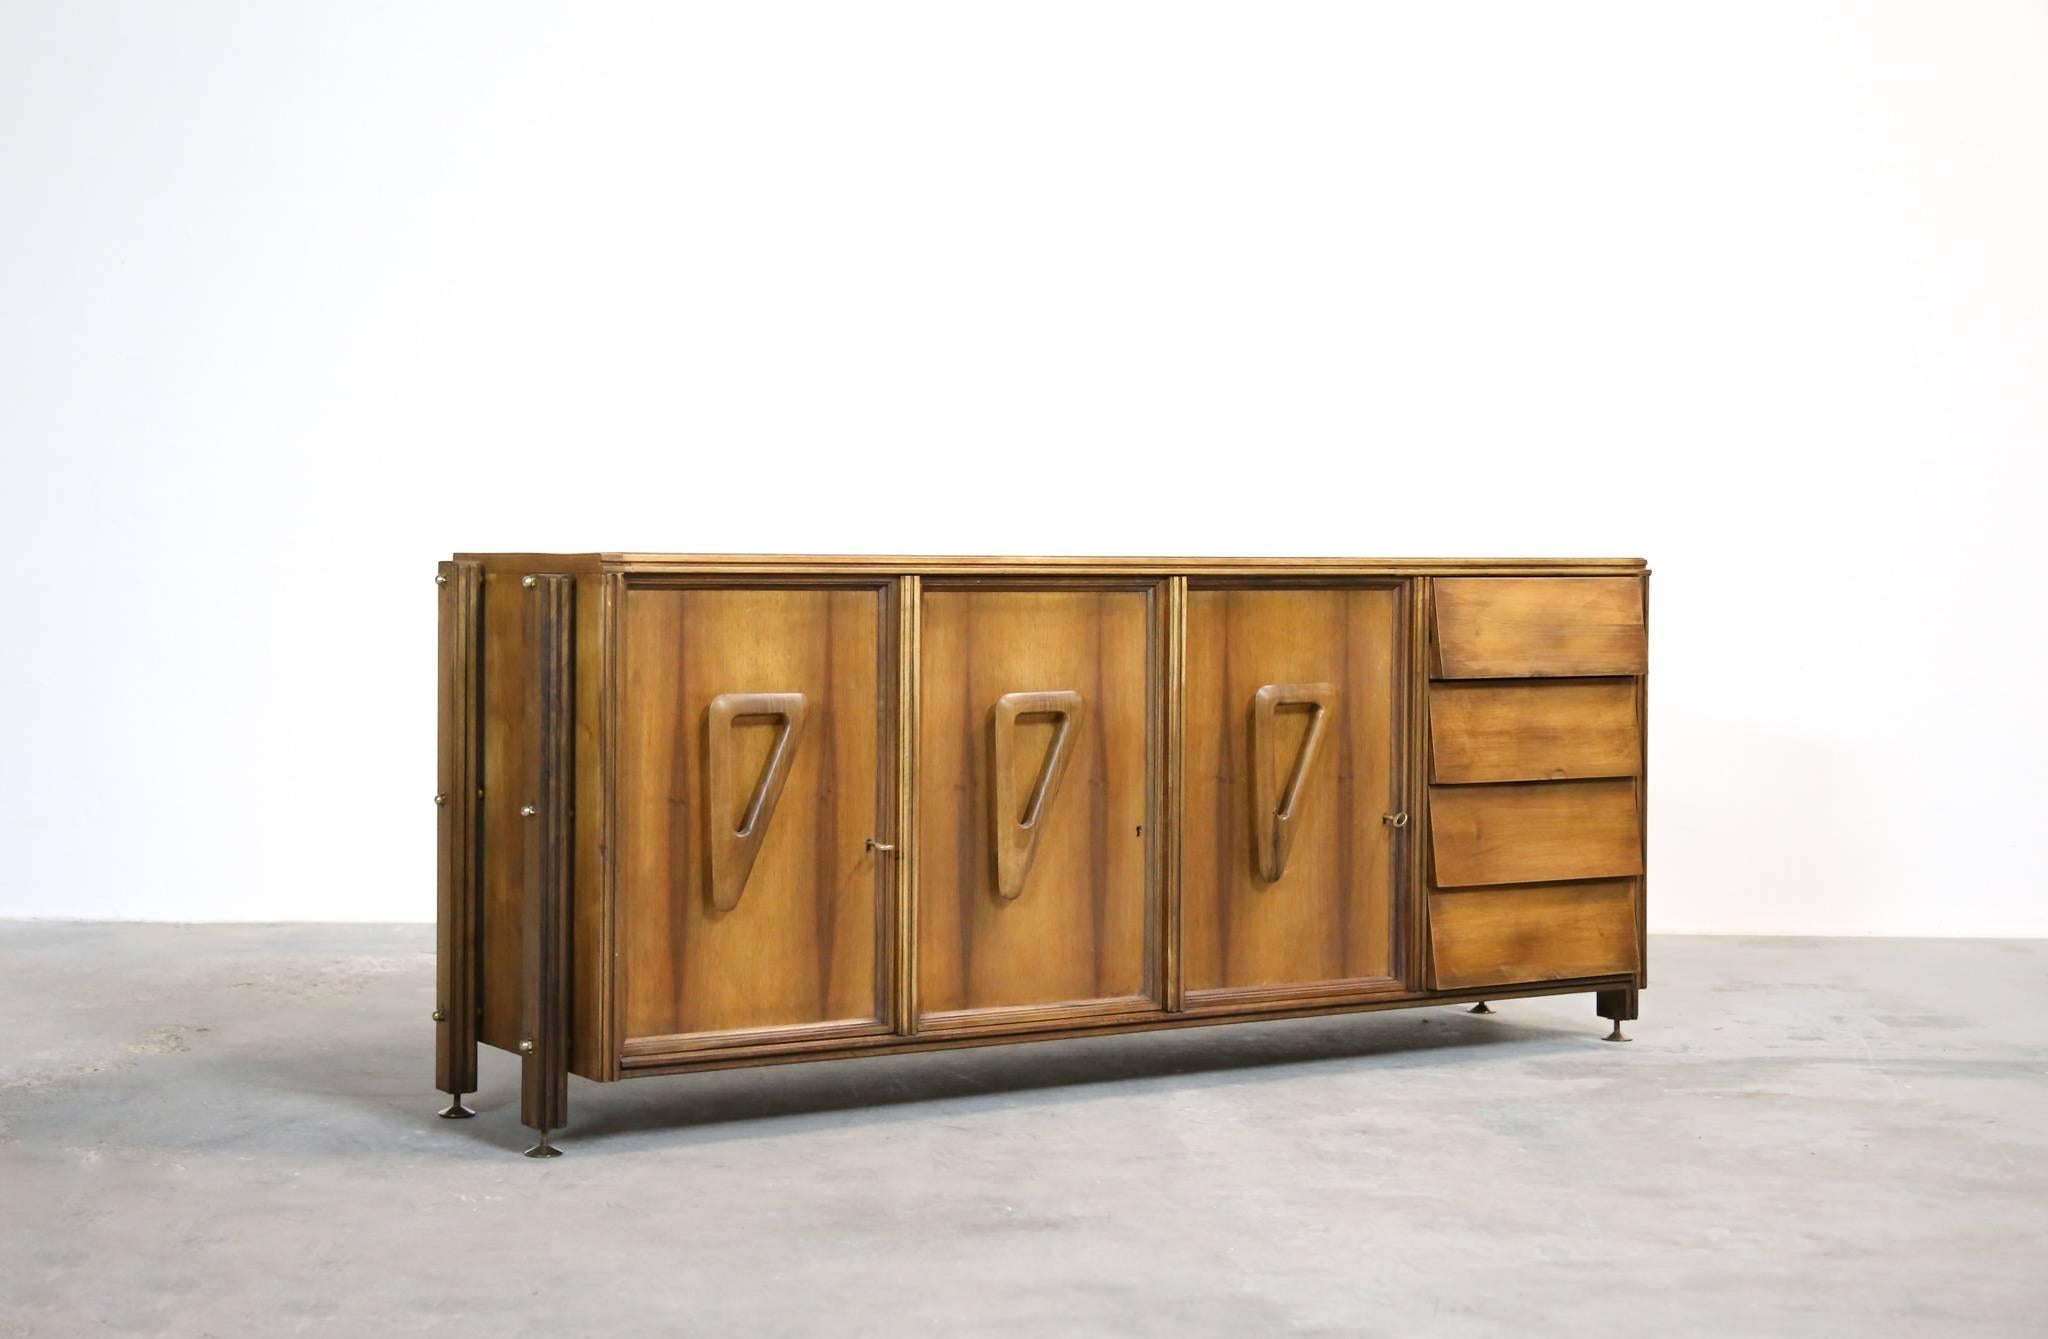 Probably a single model for this rare sideboard.
Made of rosewood.